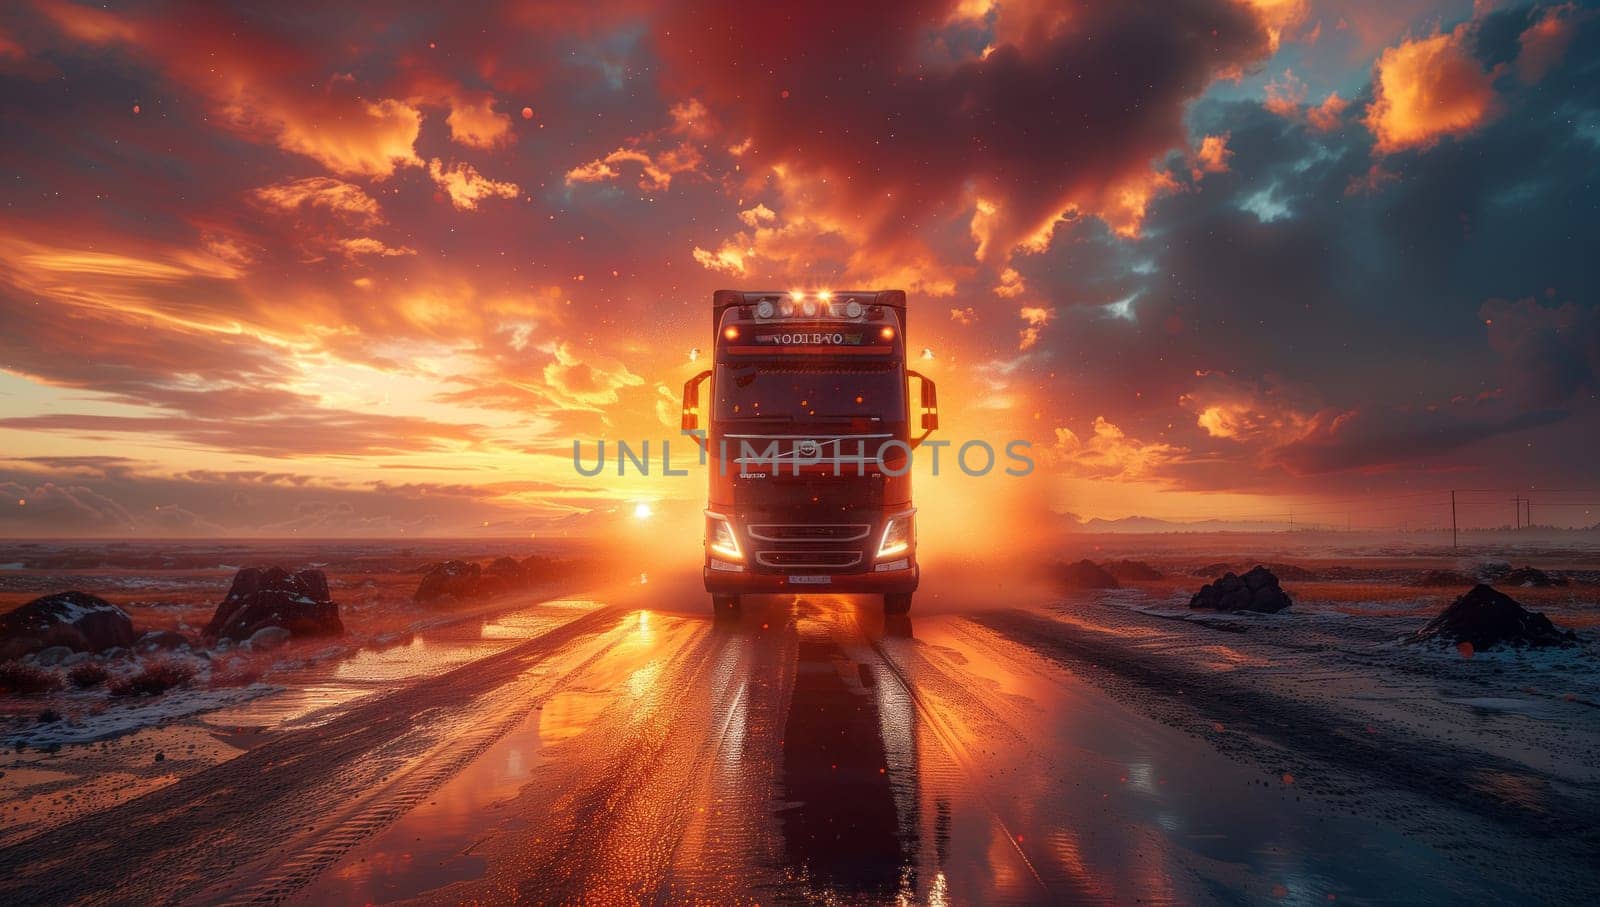 A truck travels along an icy road as the sun sets, casting a warm glow over the snowy landscape. The sky is painted with hues of orange and pink, creating a serene atmosphere